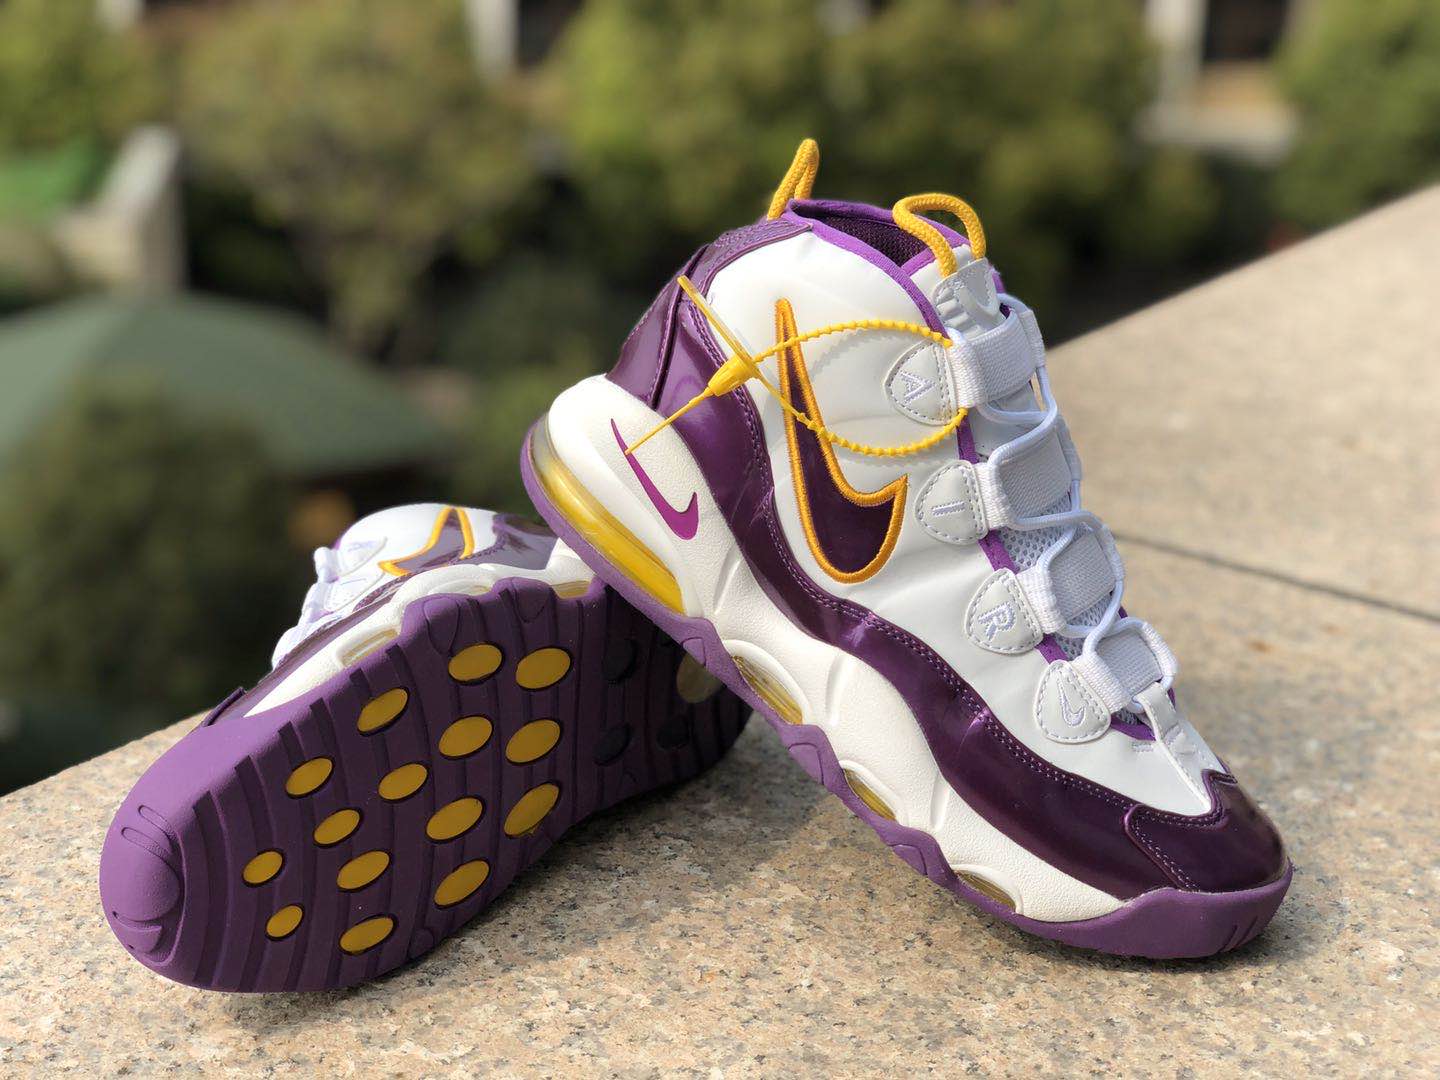 Nike Air Uptempo 95 White Purple Yellow Shoes